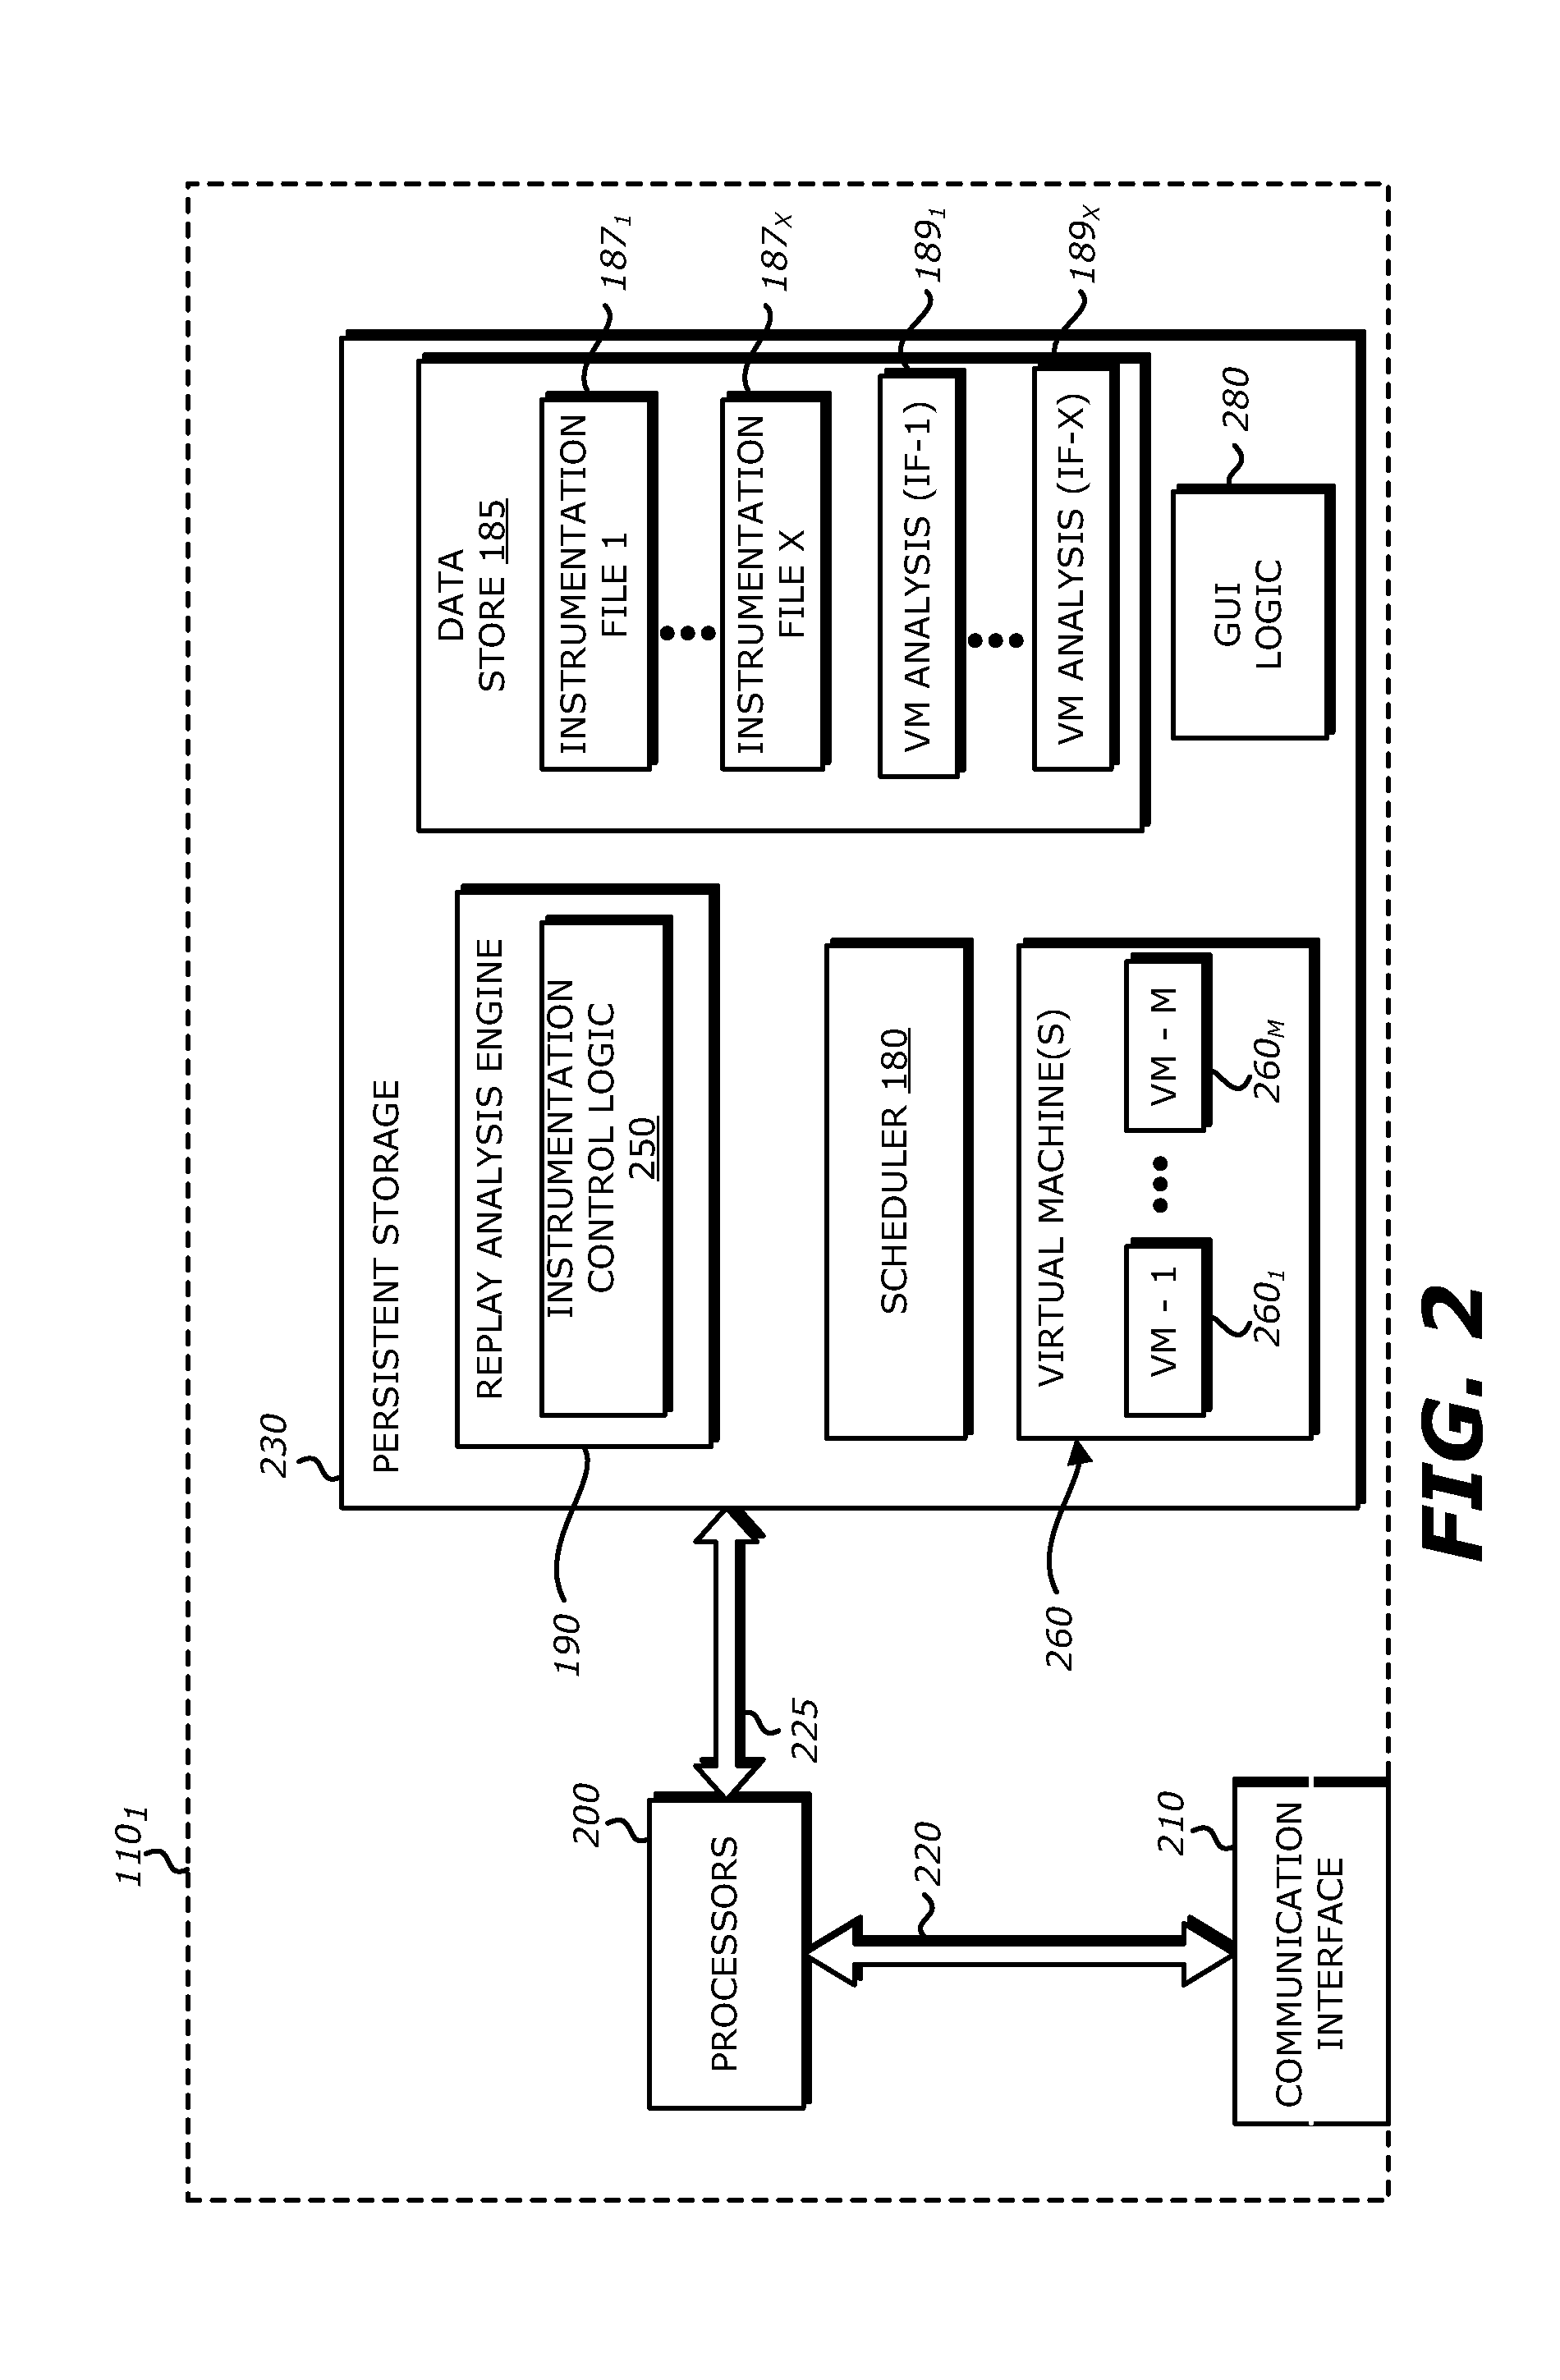 System, Apparatus and Method for Using Malware Analysis Results to Drive Adaptive Instrumentation of Virtual Machines to Improve Exploit Detection